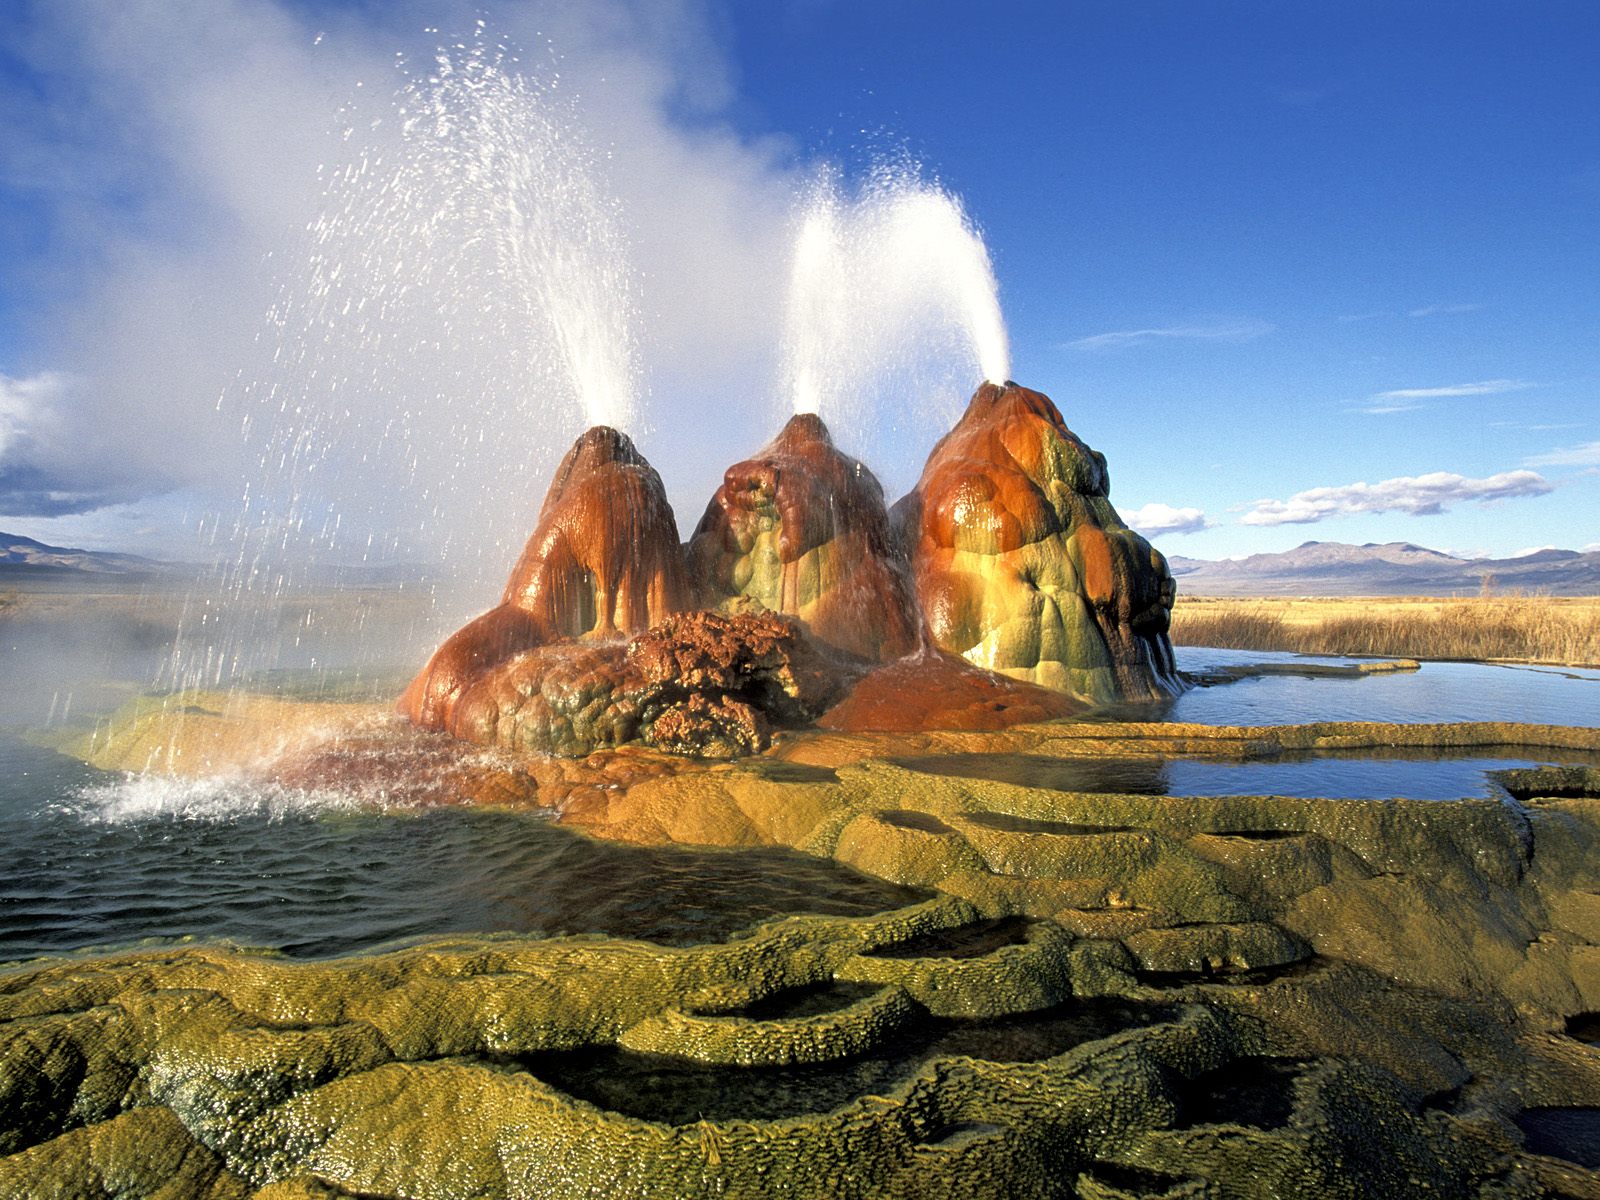 The famous geyser called Fly (Fly), in fact, does not exceed human growth